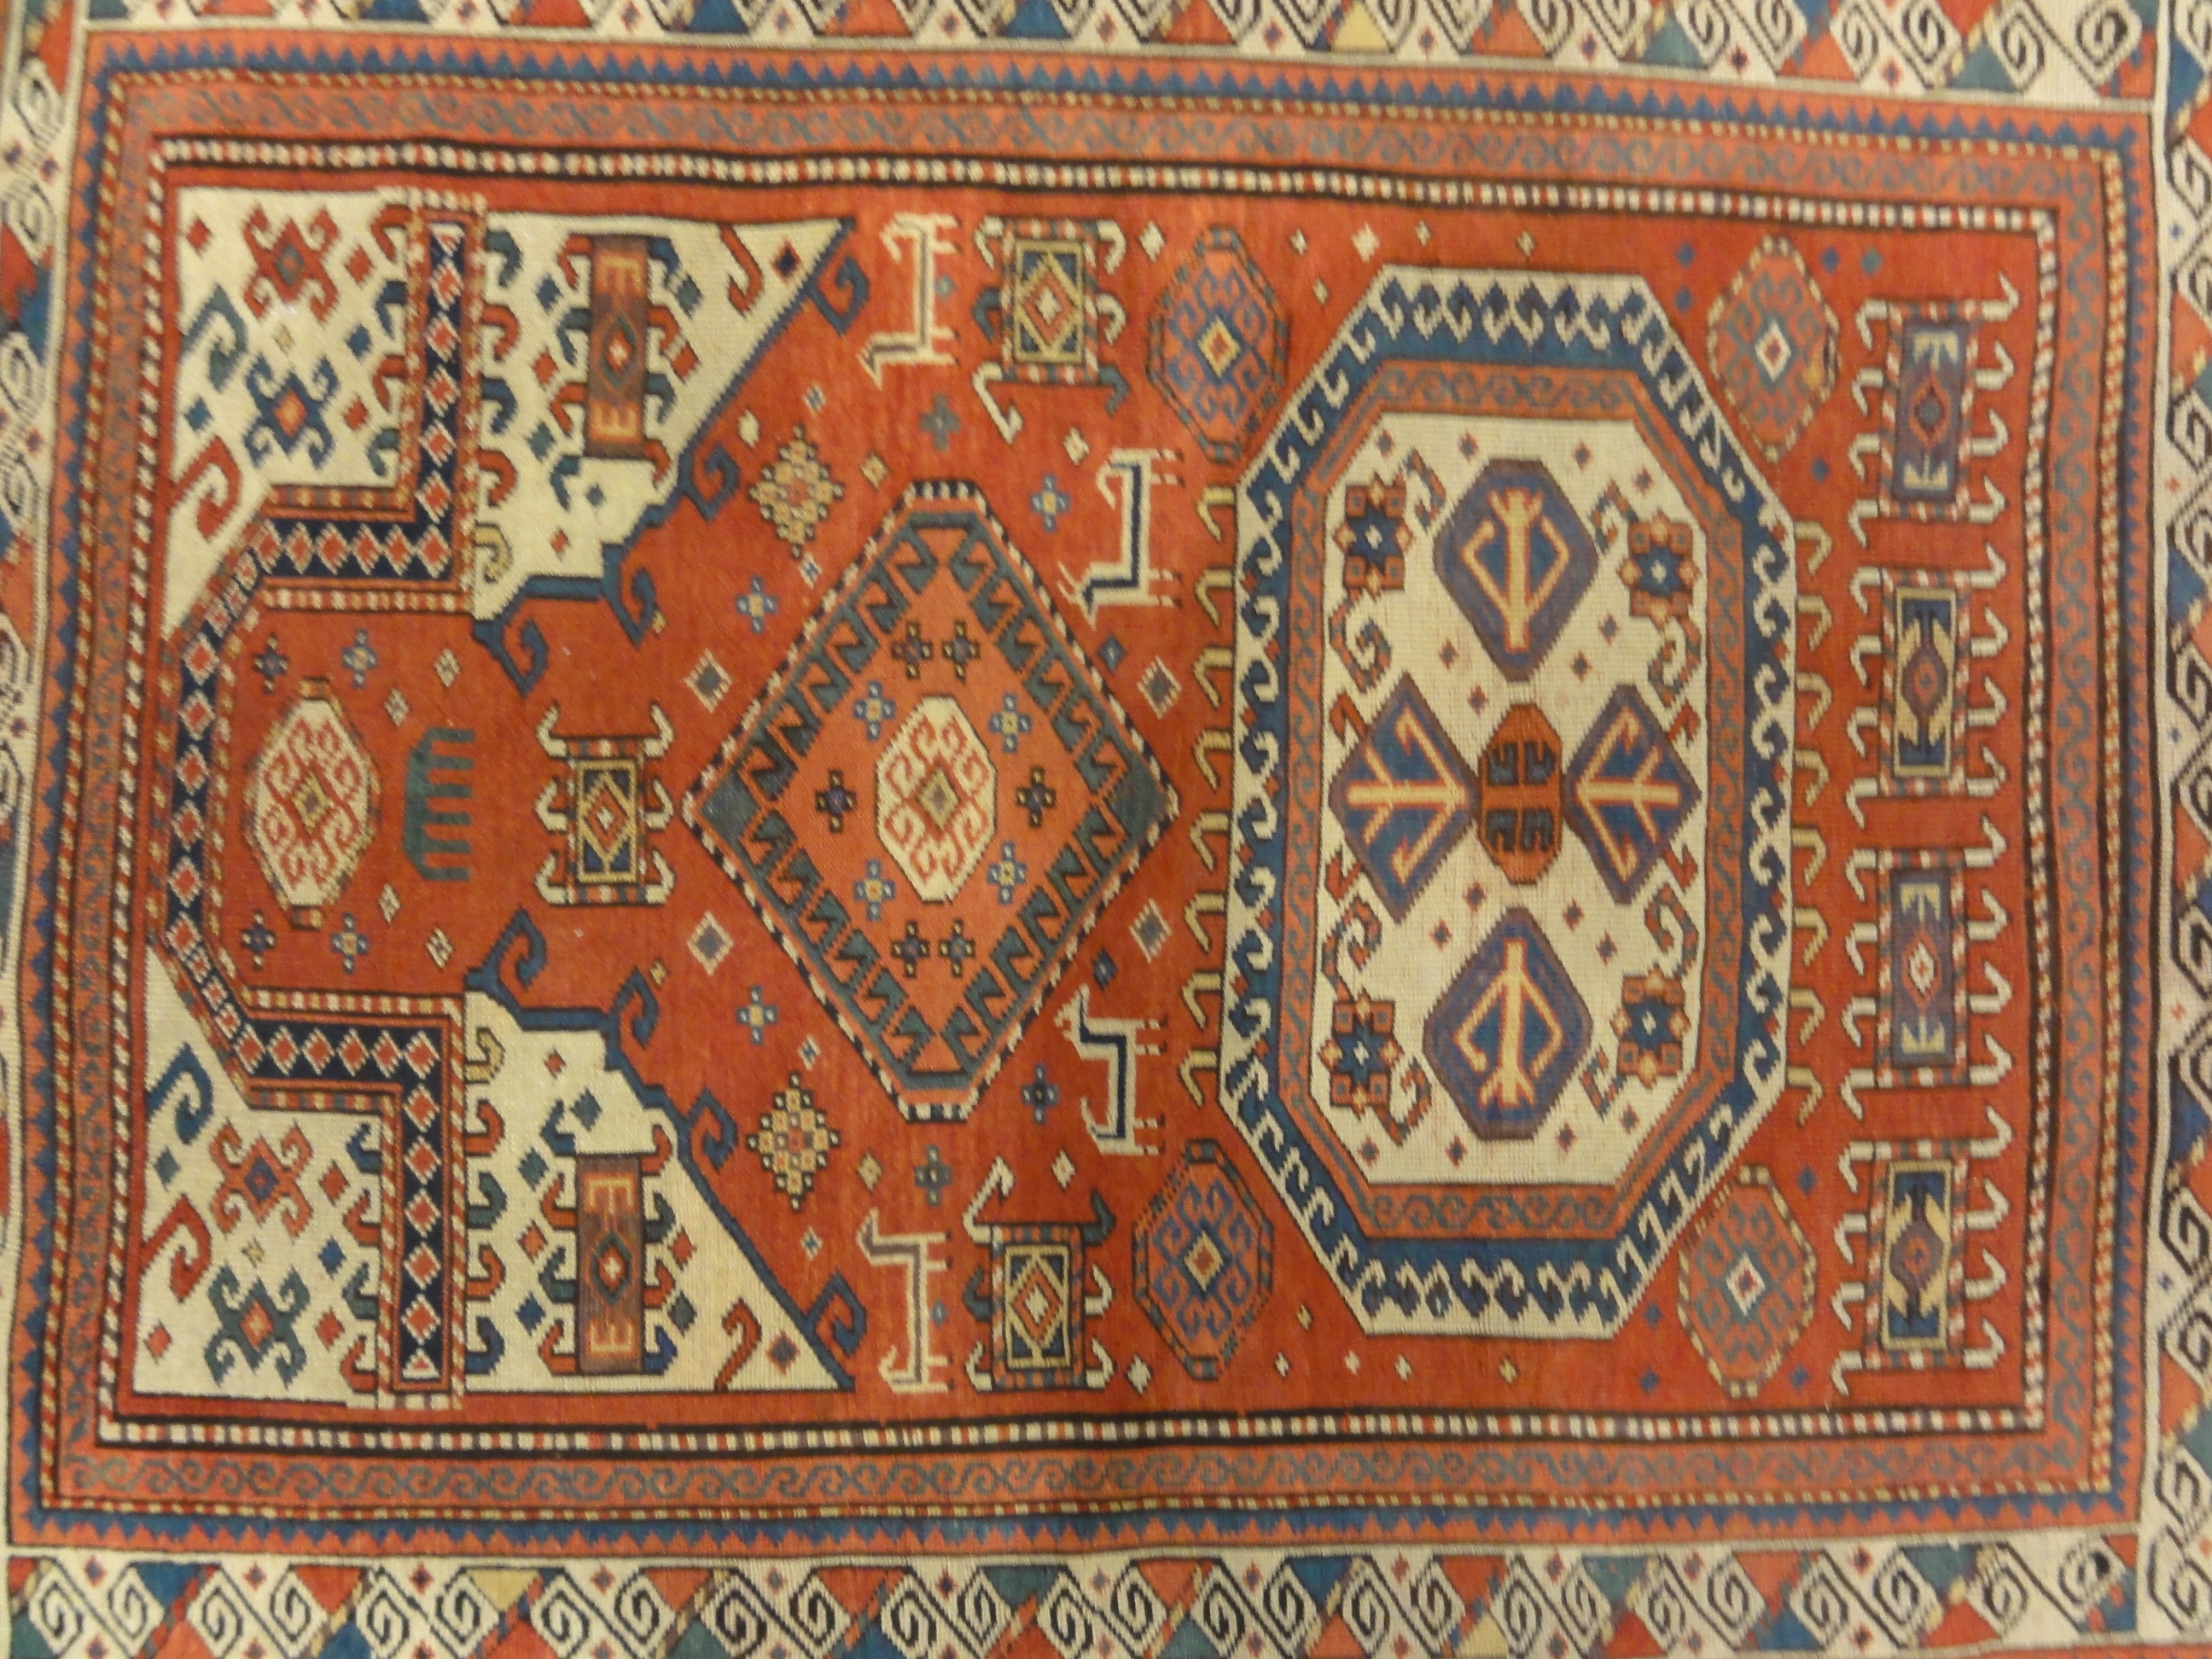 Finest Rare Museum Quality Caucasian Kazak Rug From the Early 19th Century. Genuine Woven Carpet Art. Santa Barbara Design Center Rugs and More.